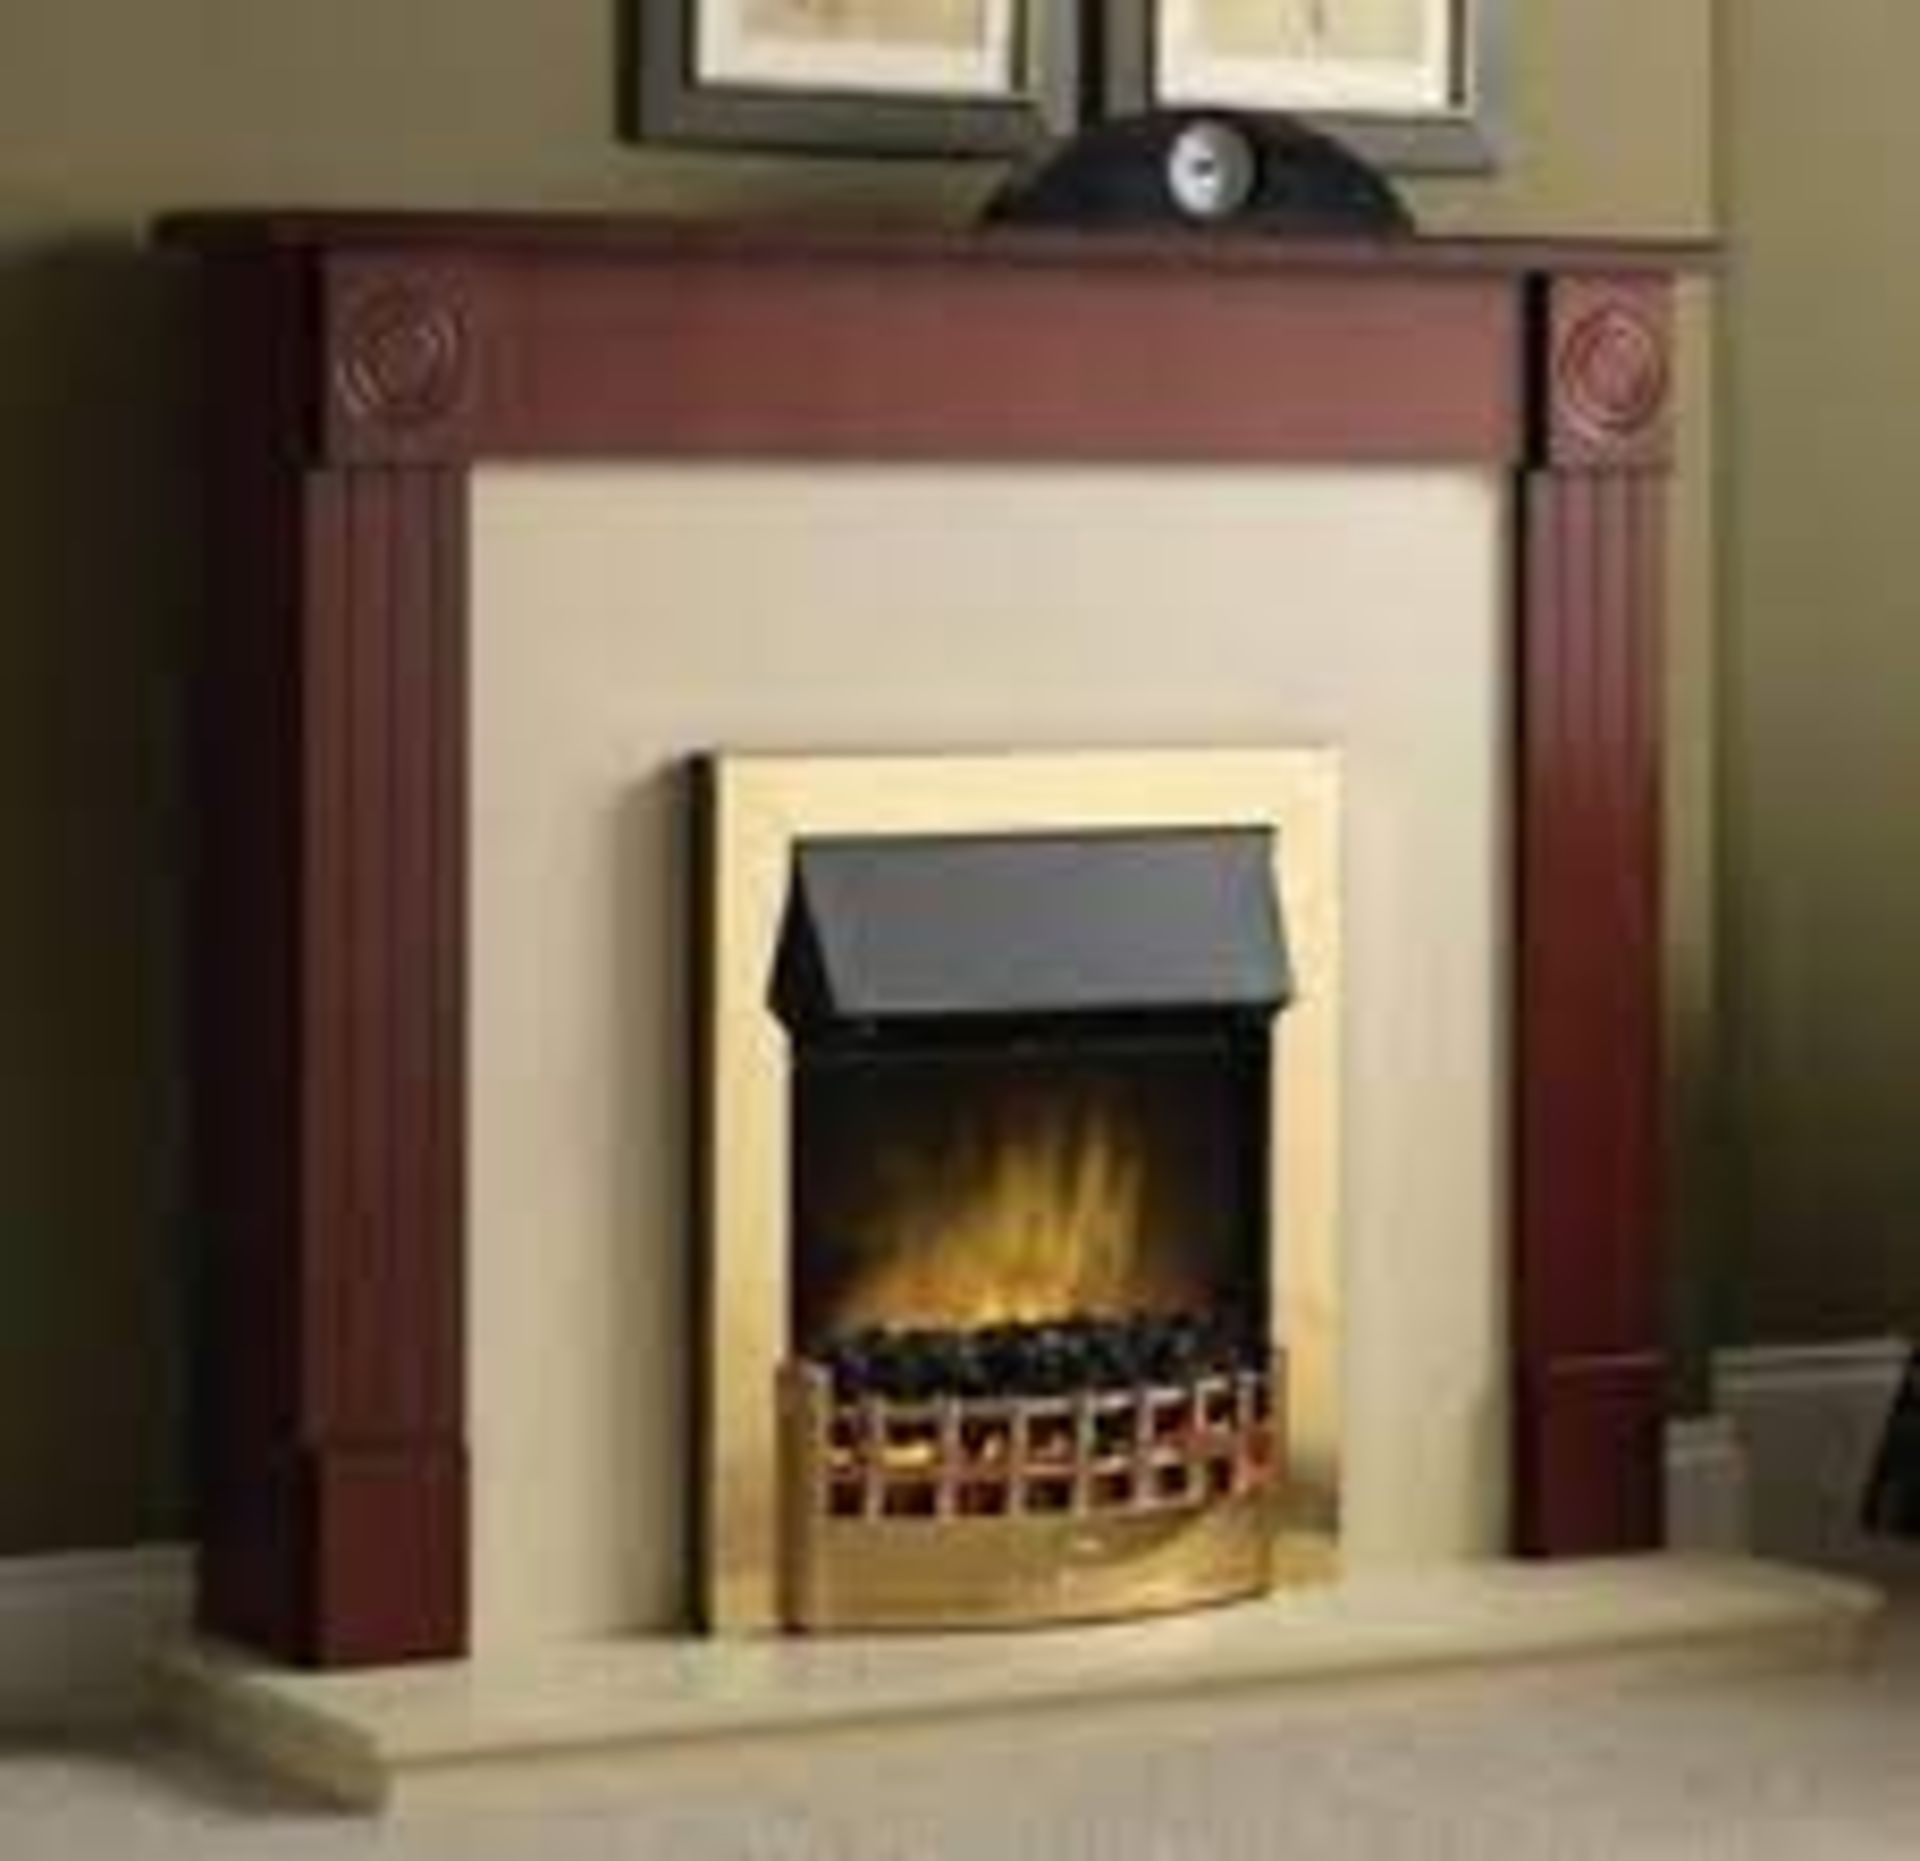 New - Robinson Willey Calgary Super Eco Petite Electric Fire Suite. RRP £579.99. Calgary Petite - Image 2 of 2